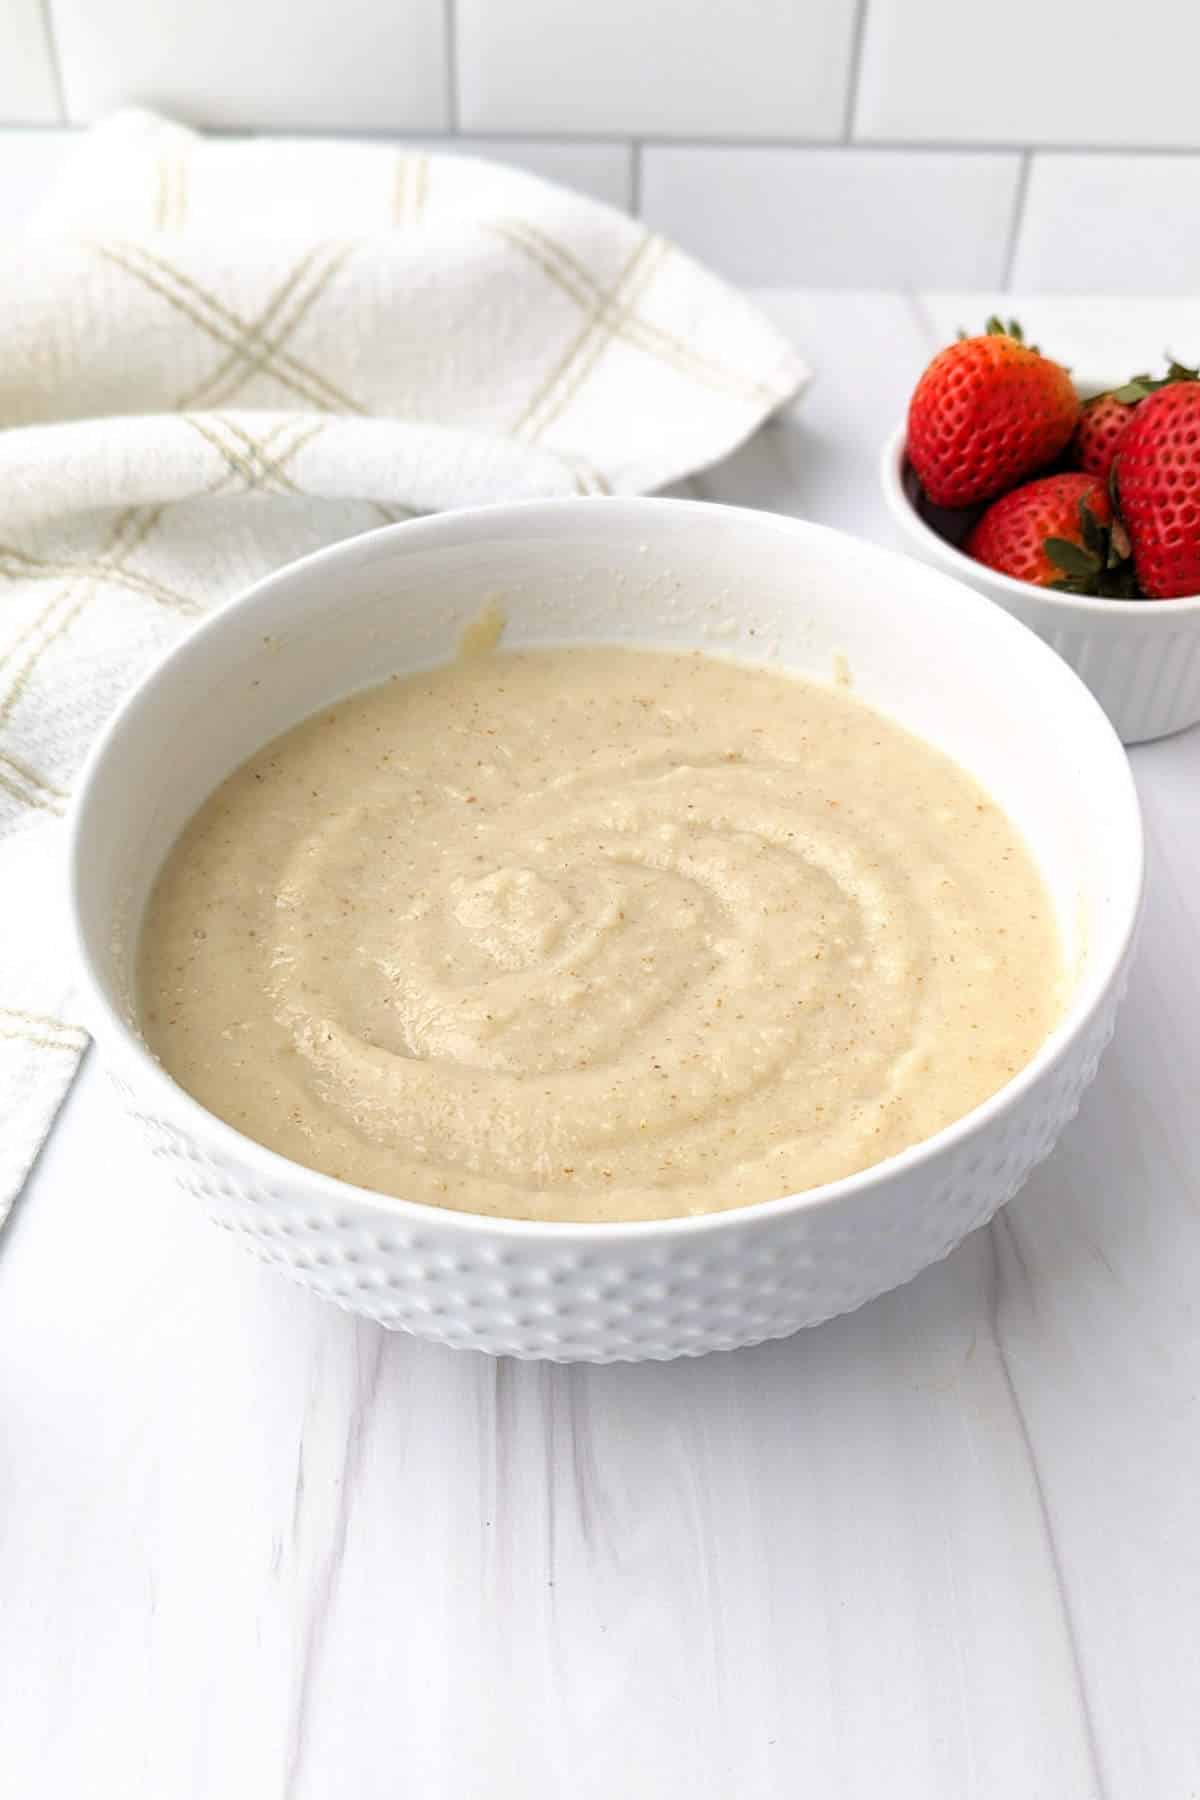 Vegan cream of wheat in a microwave-safe bowl after cooking.